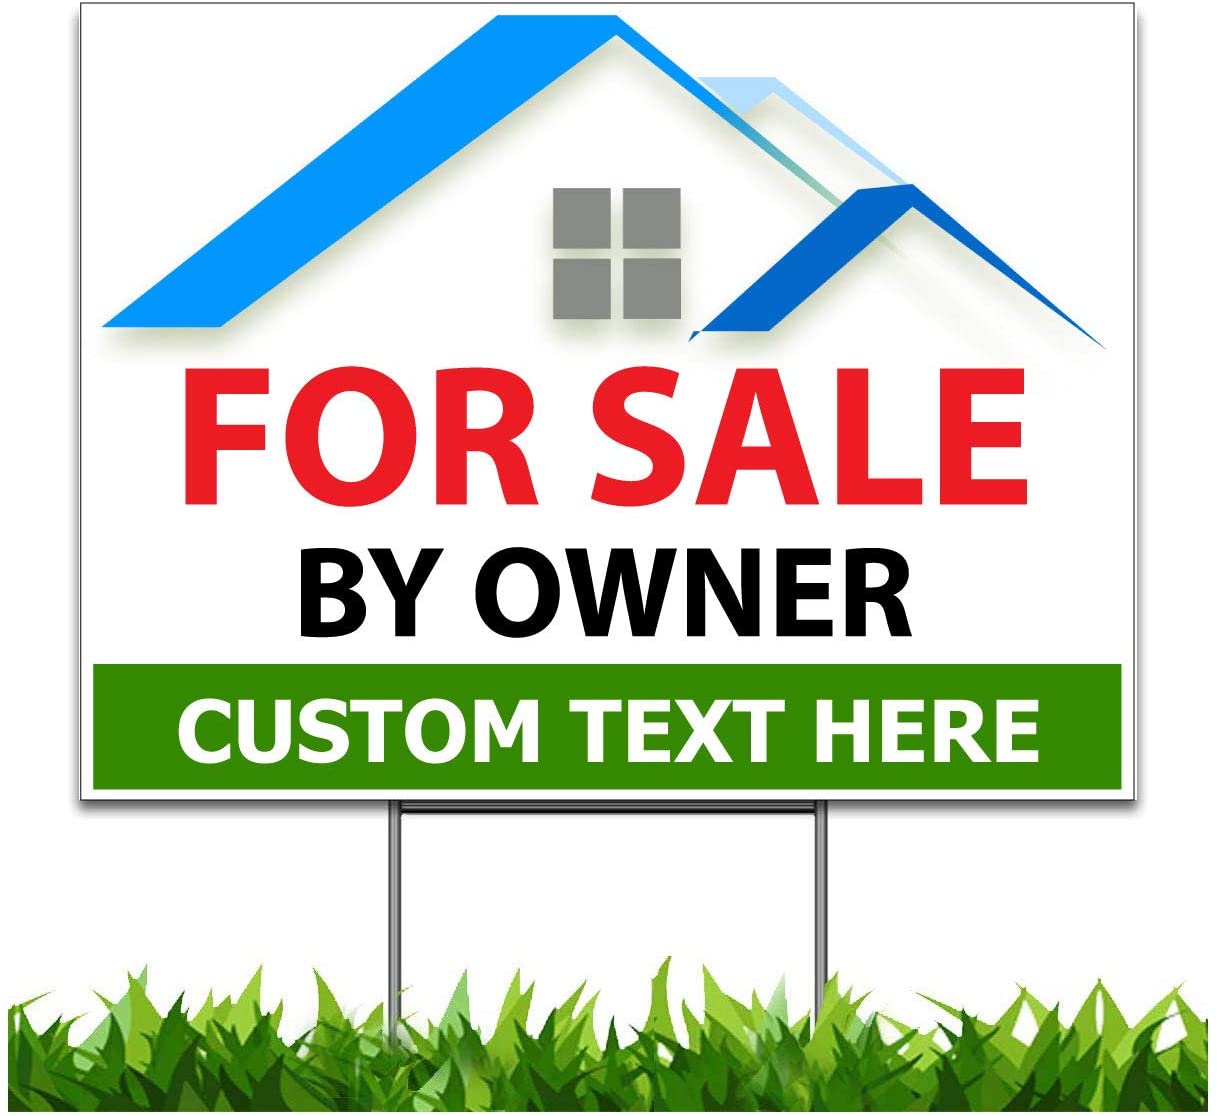 For Sale by Owner Sign, Custom Yard Sign, Personalized, 18 x 24-inch, H-Stake Included